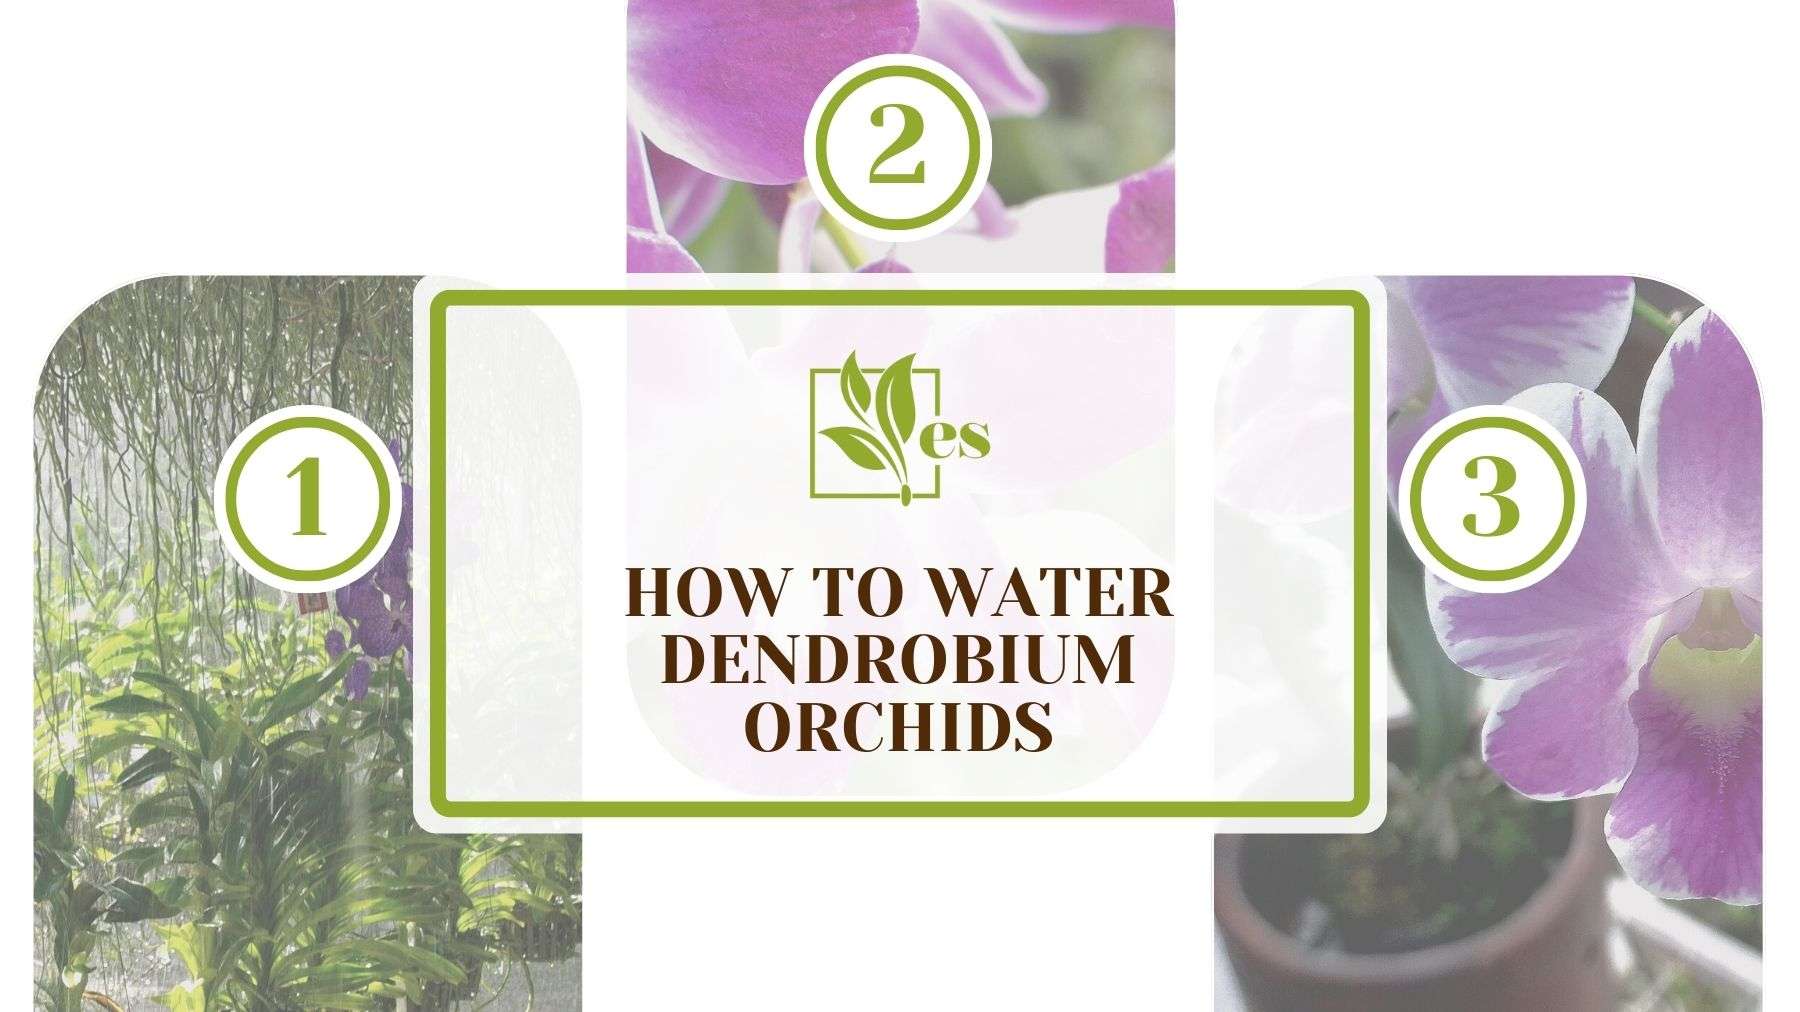 How to Water Dendrobium Orchids